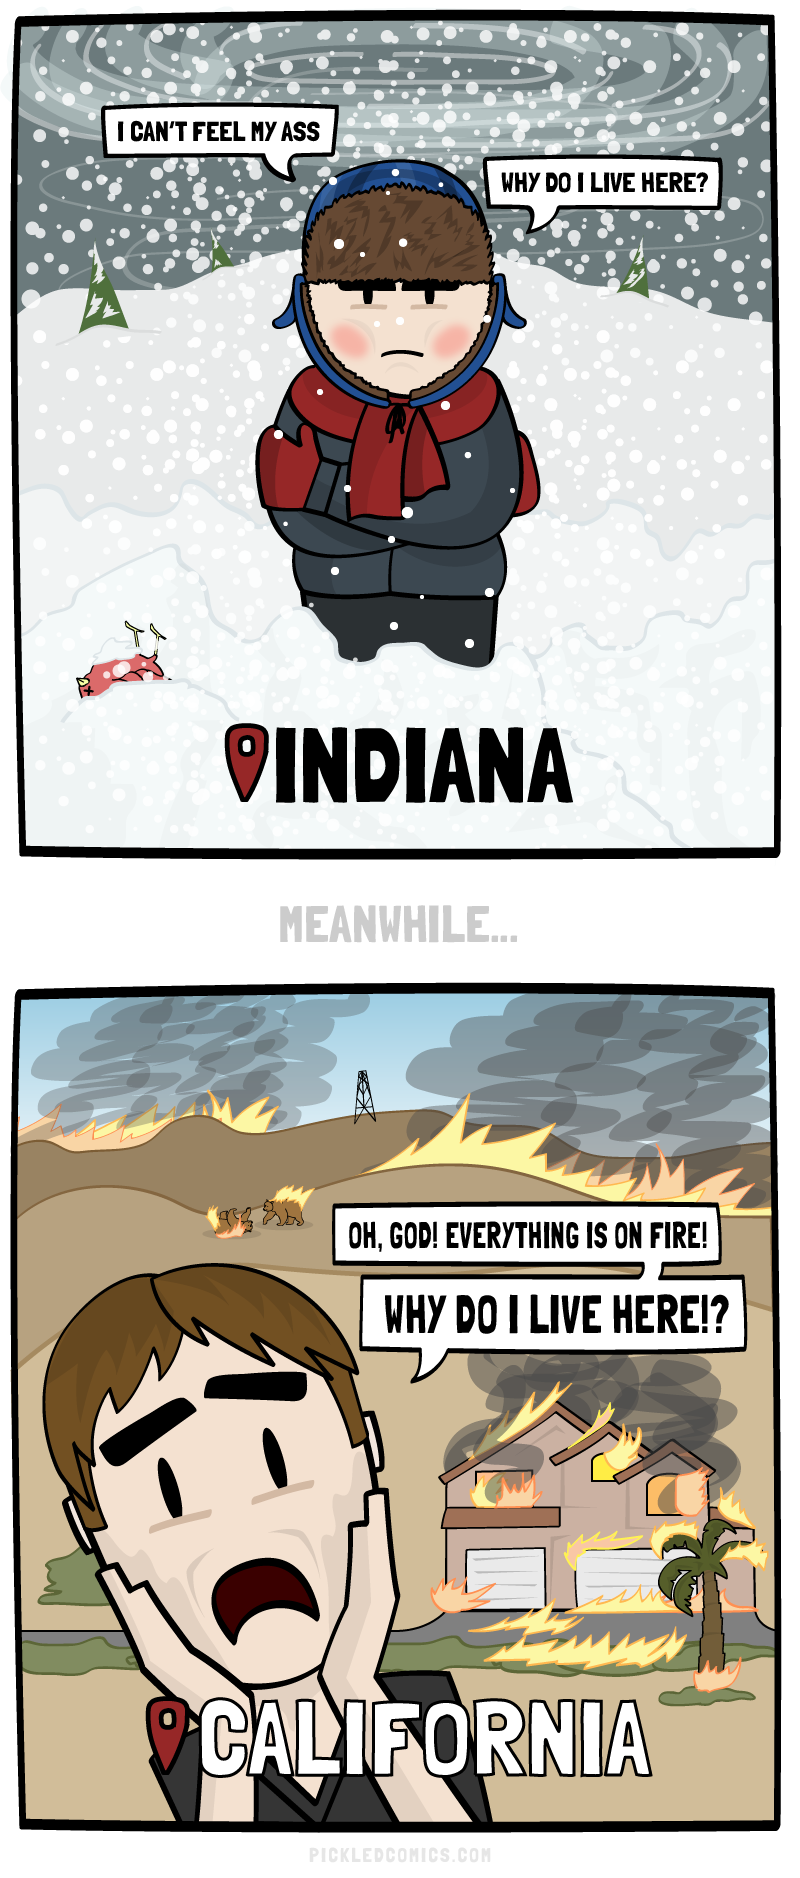 I can't feel my ass. Why do I live here? Indiana. Meanwhile... Oh, God! Everything is on fire! Why do I live here!?